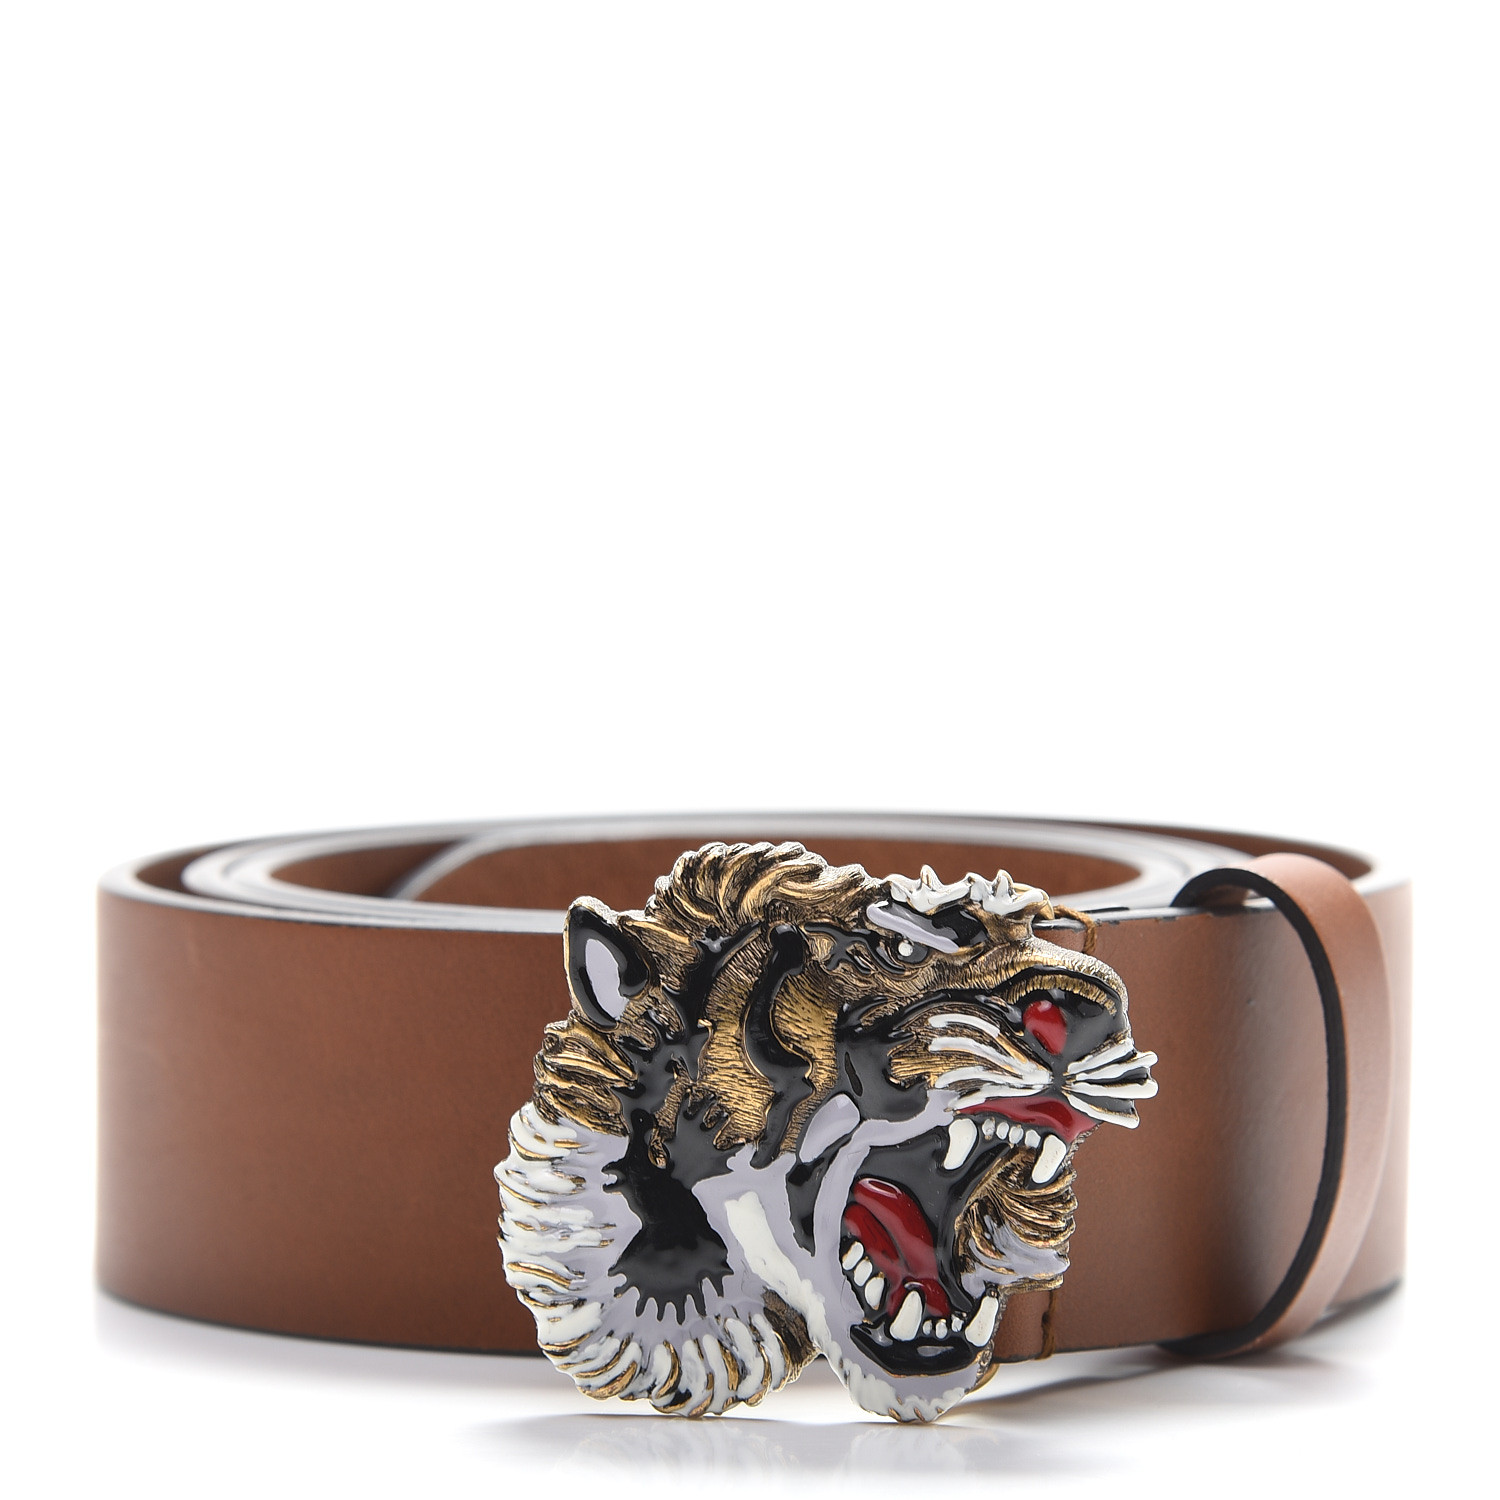 gucci belt with tiger head